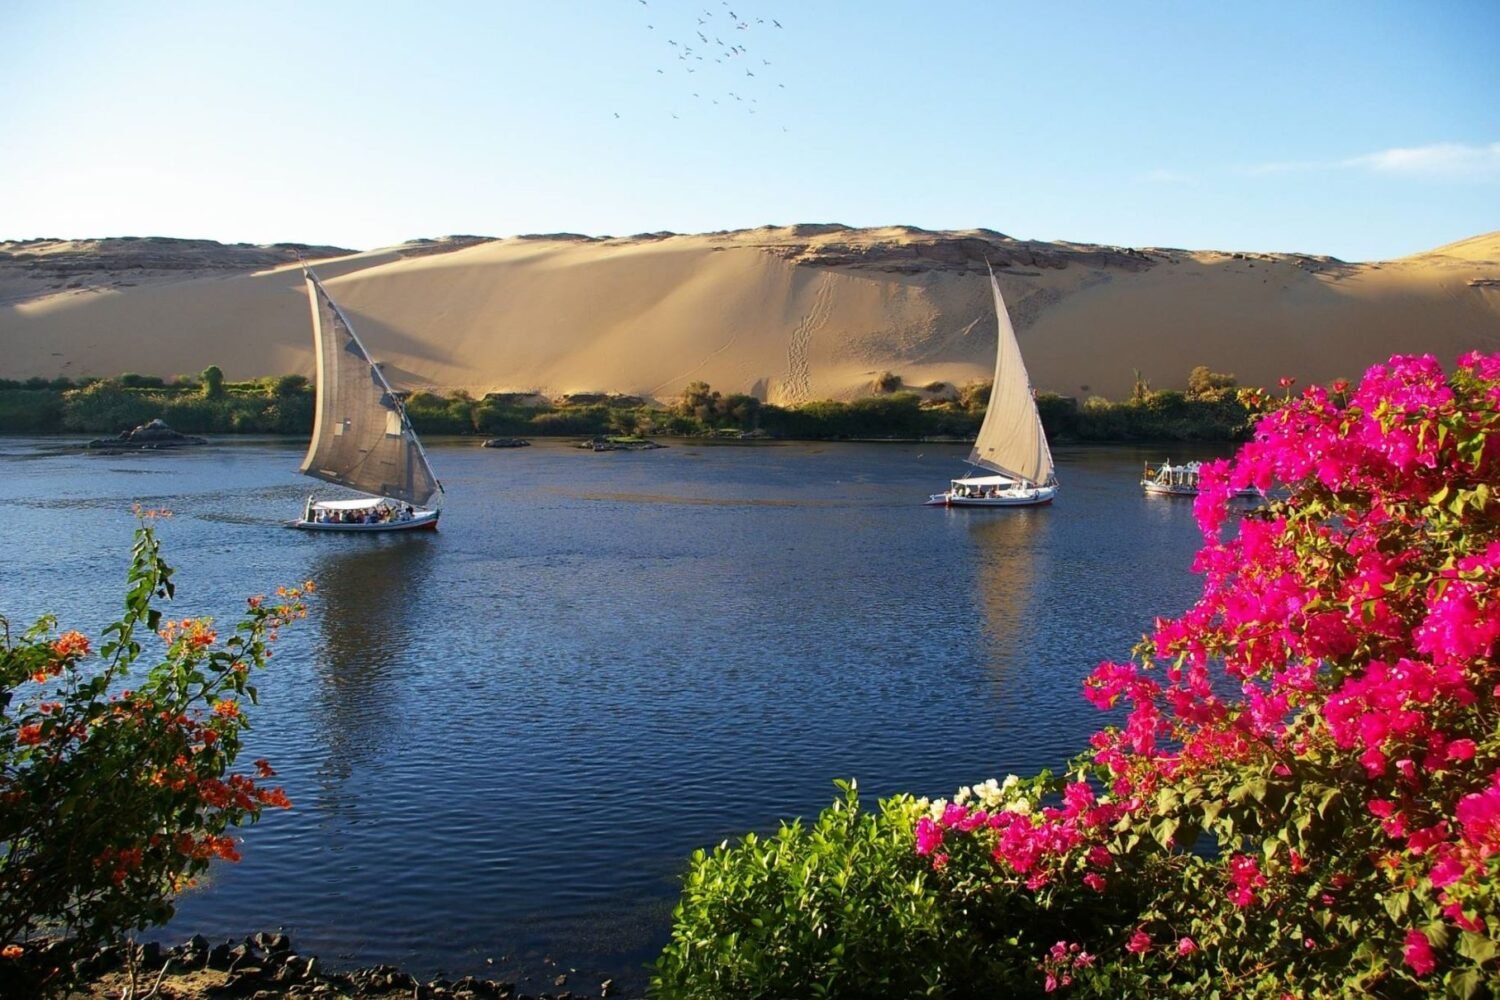 15-Day Offbeat Egypt Travel Experience